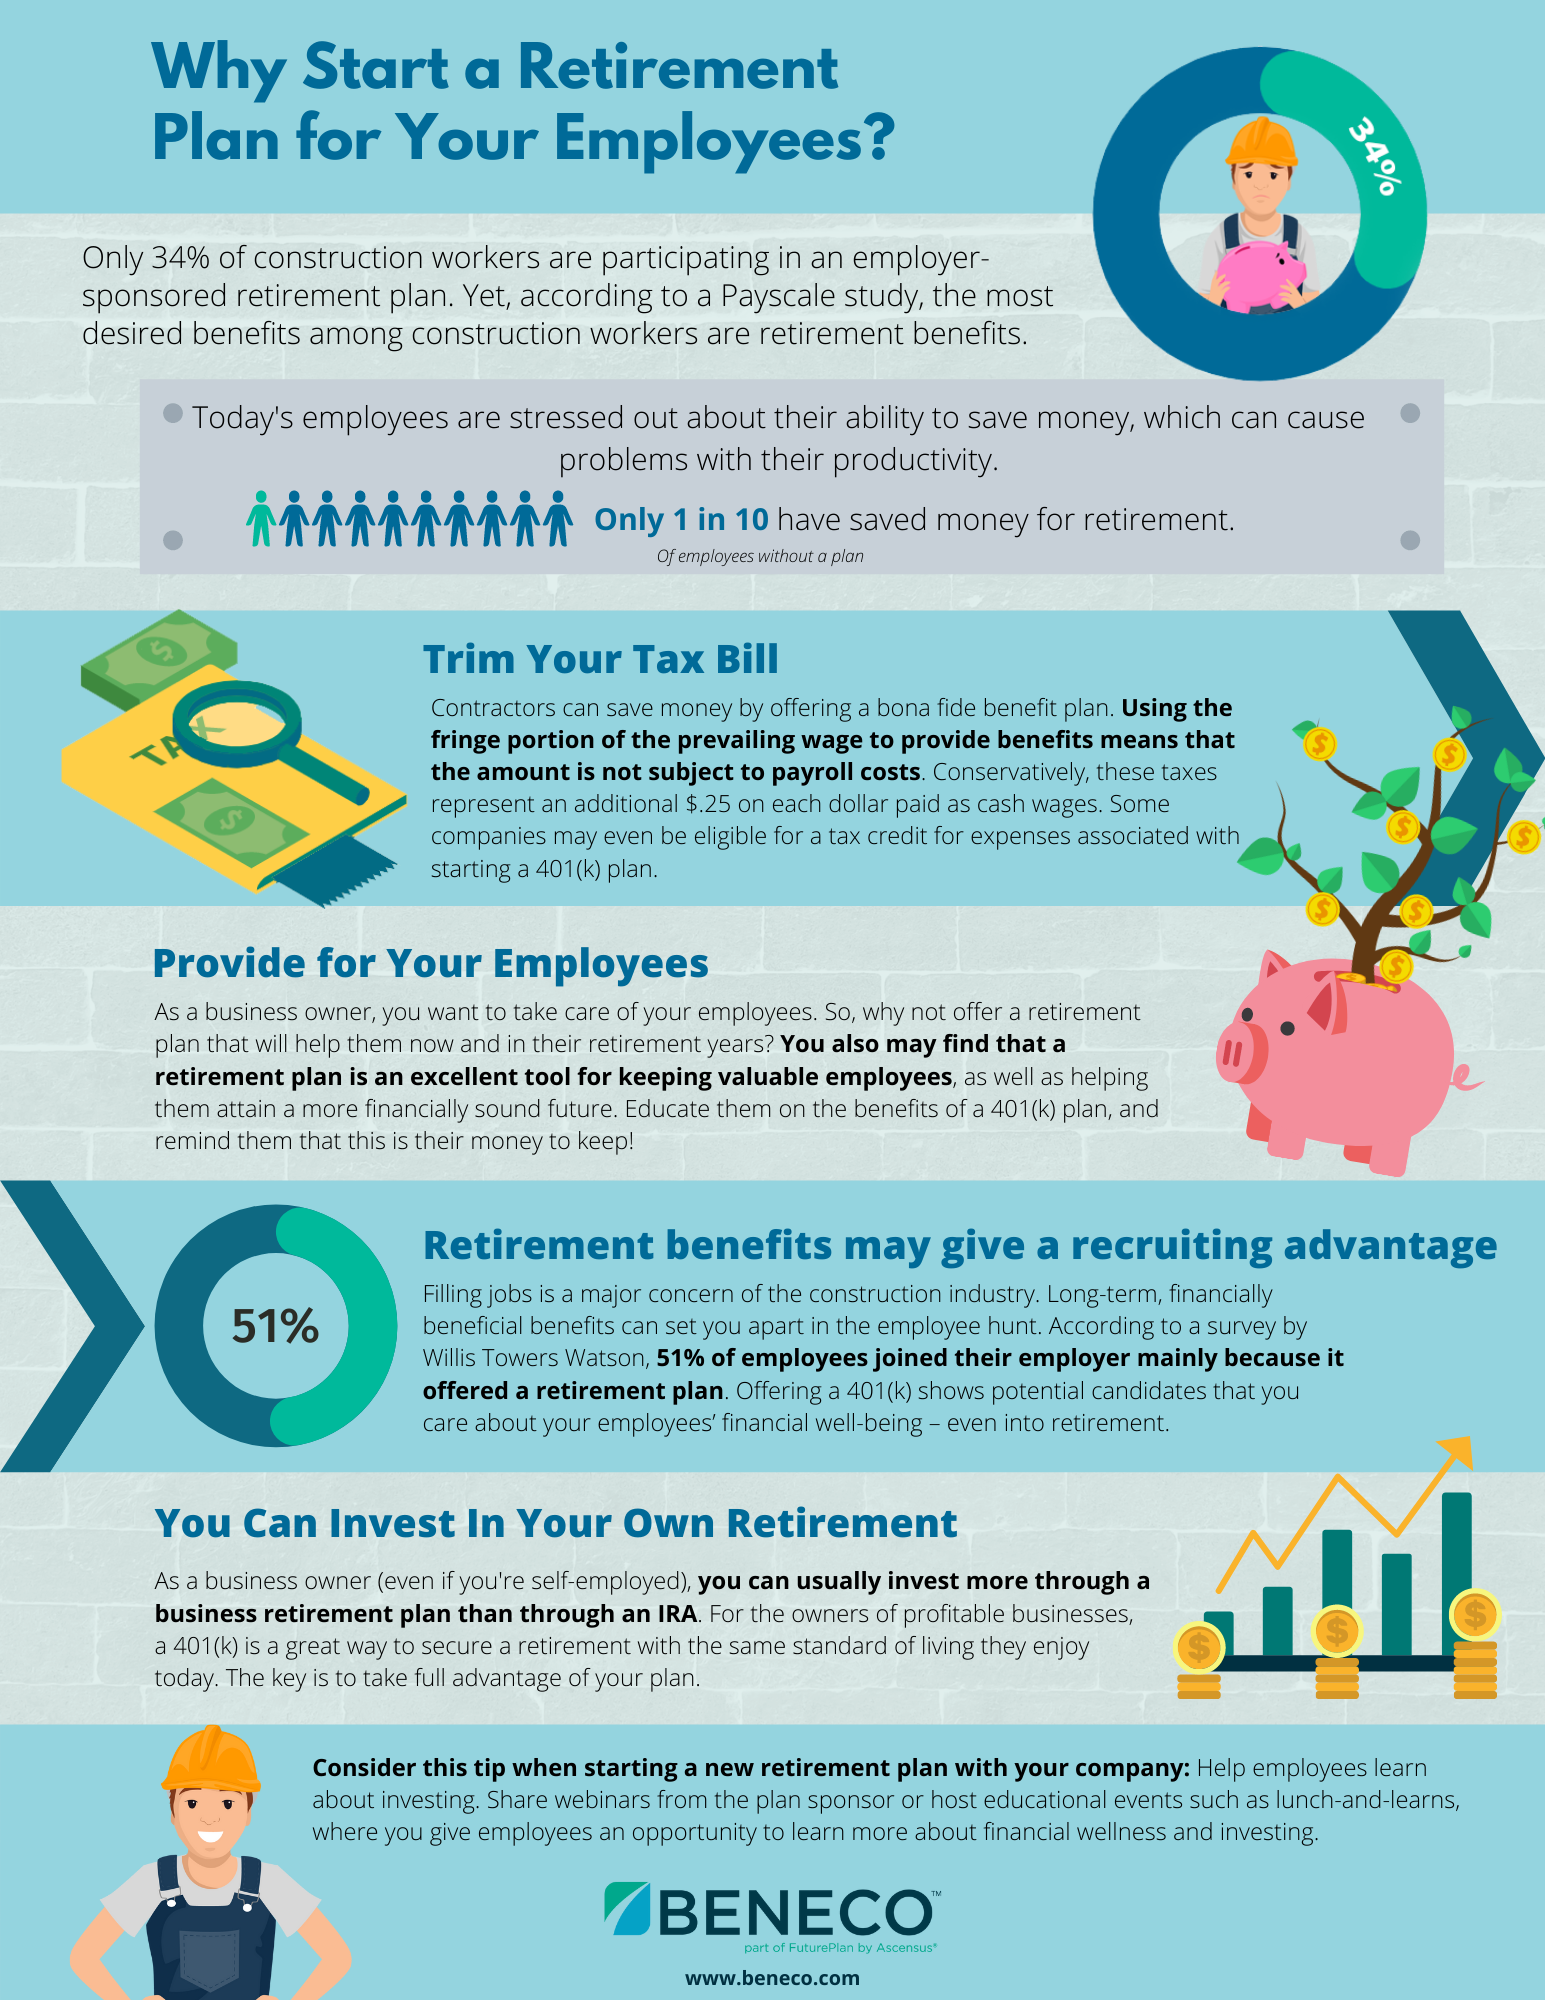 For Employers - Why Start a 401k Plan?